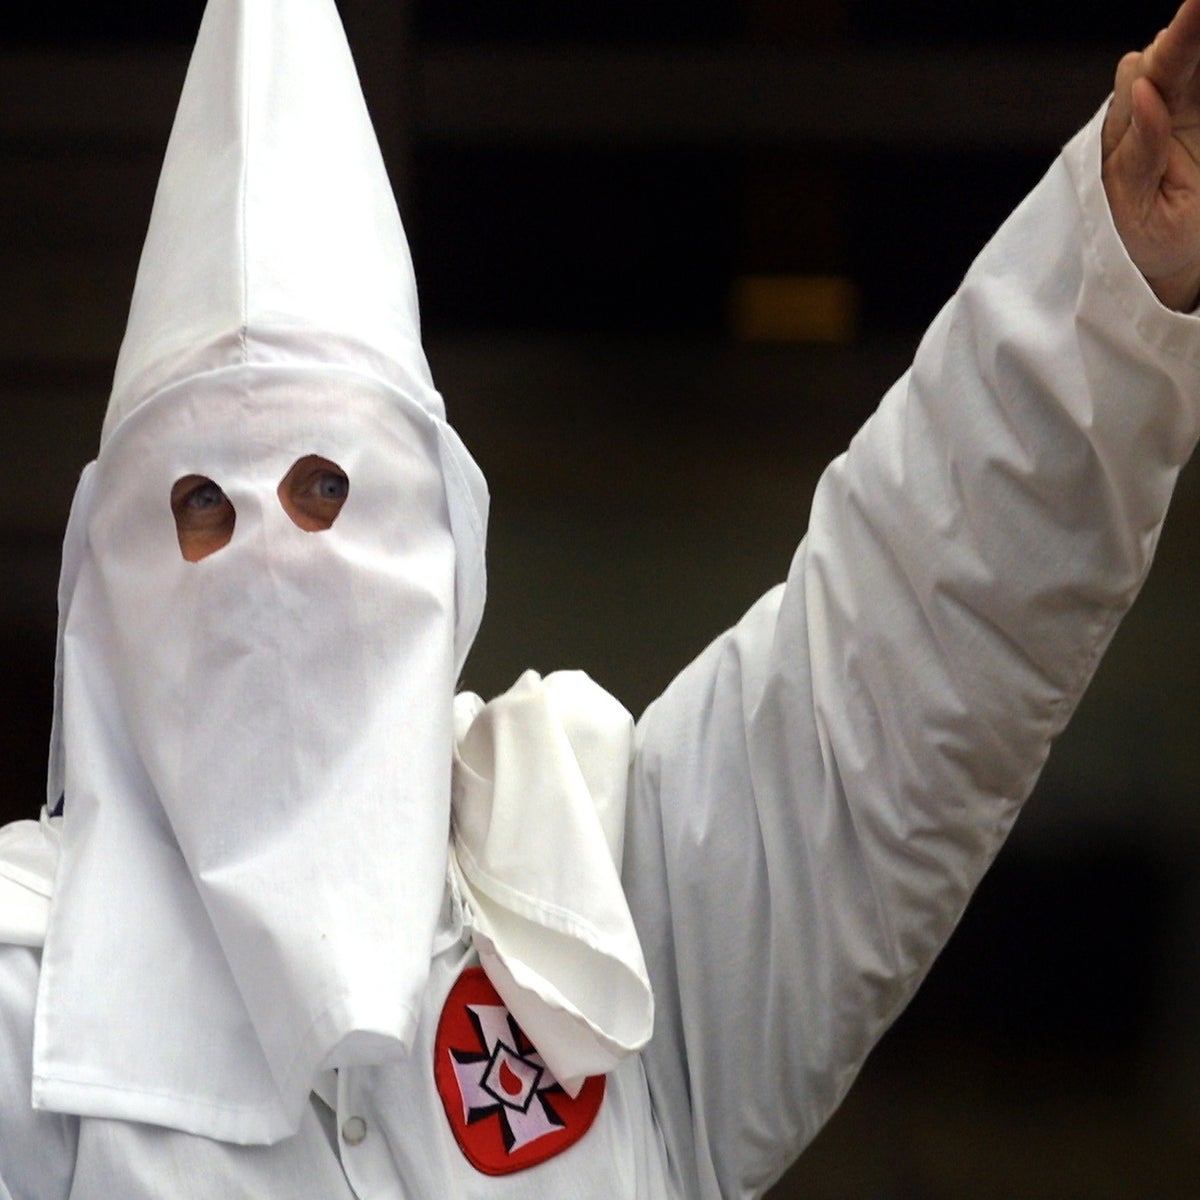 KKK costumes spotted at carnival in Switzerland prompt